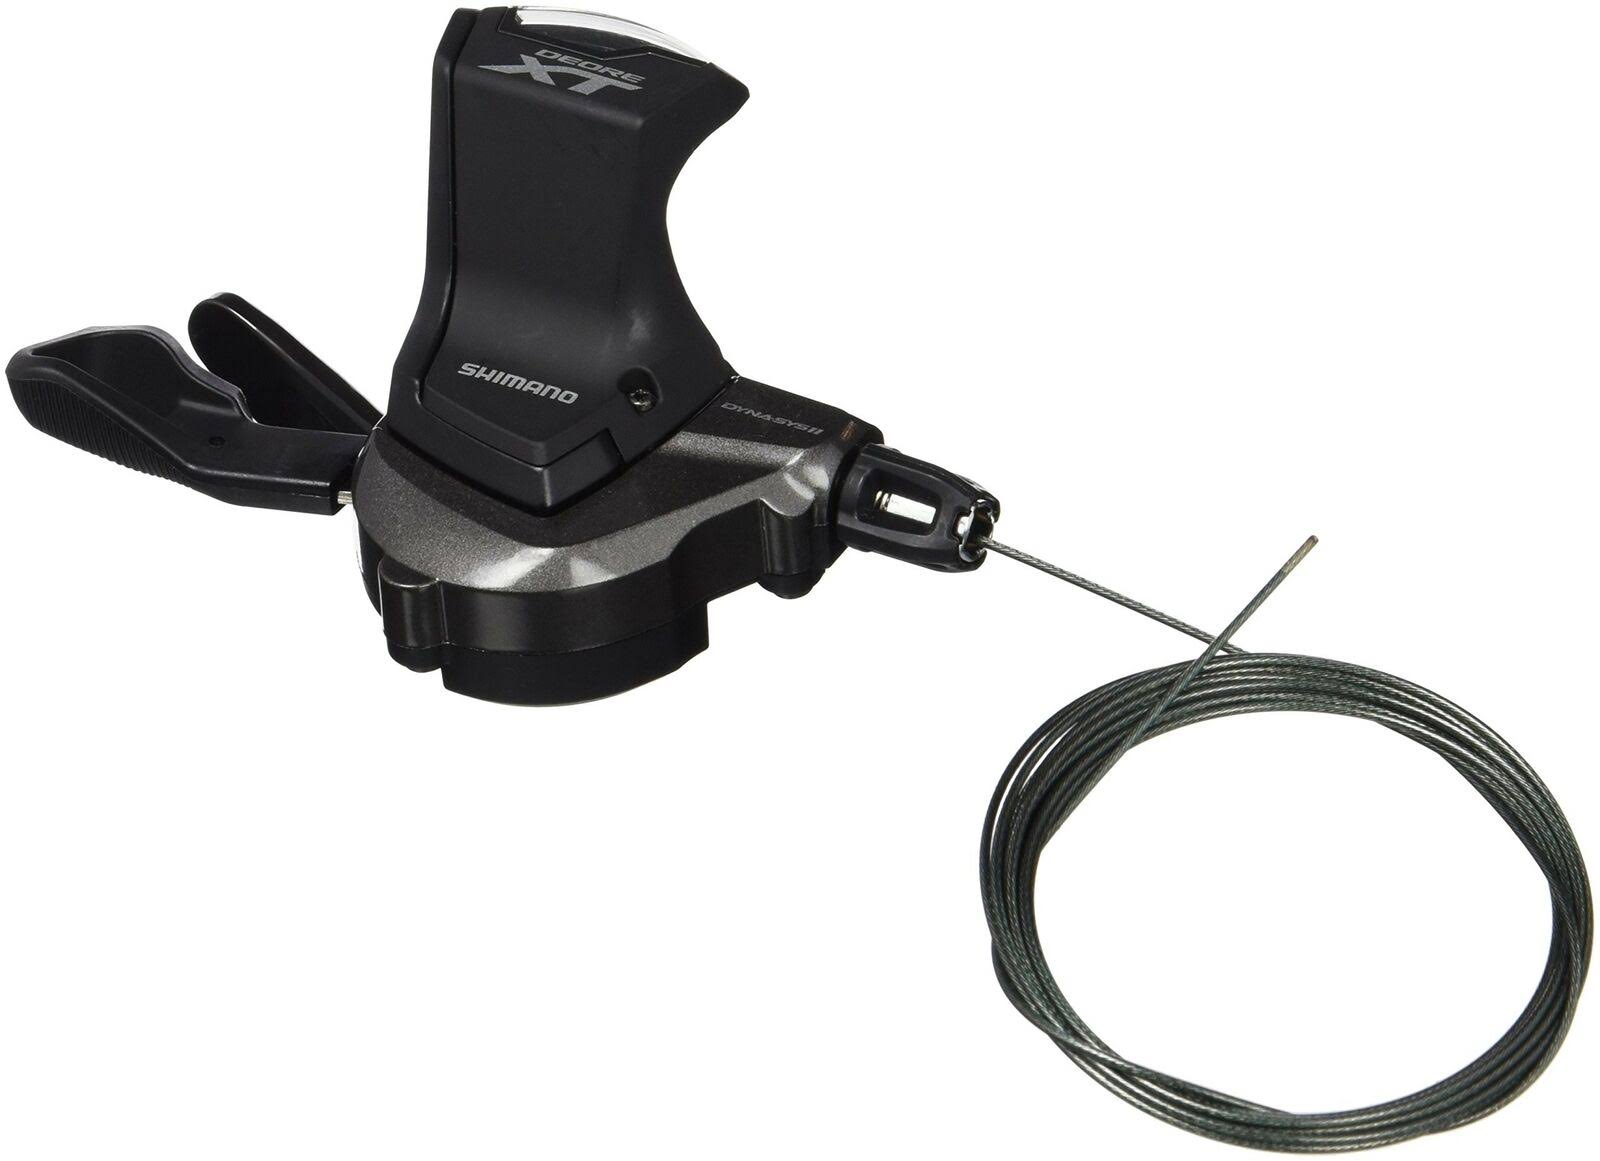 Shimano Deore XT Bicycle Right Shifter - 11 Speed